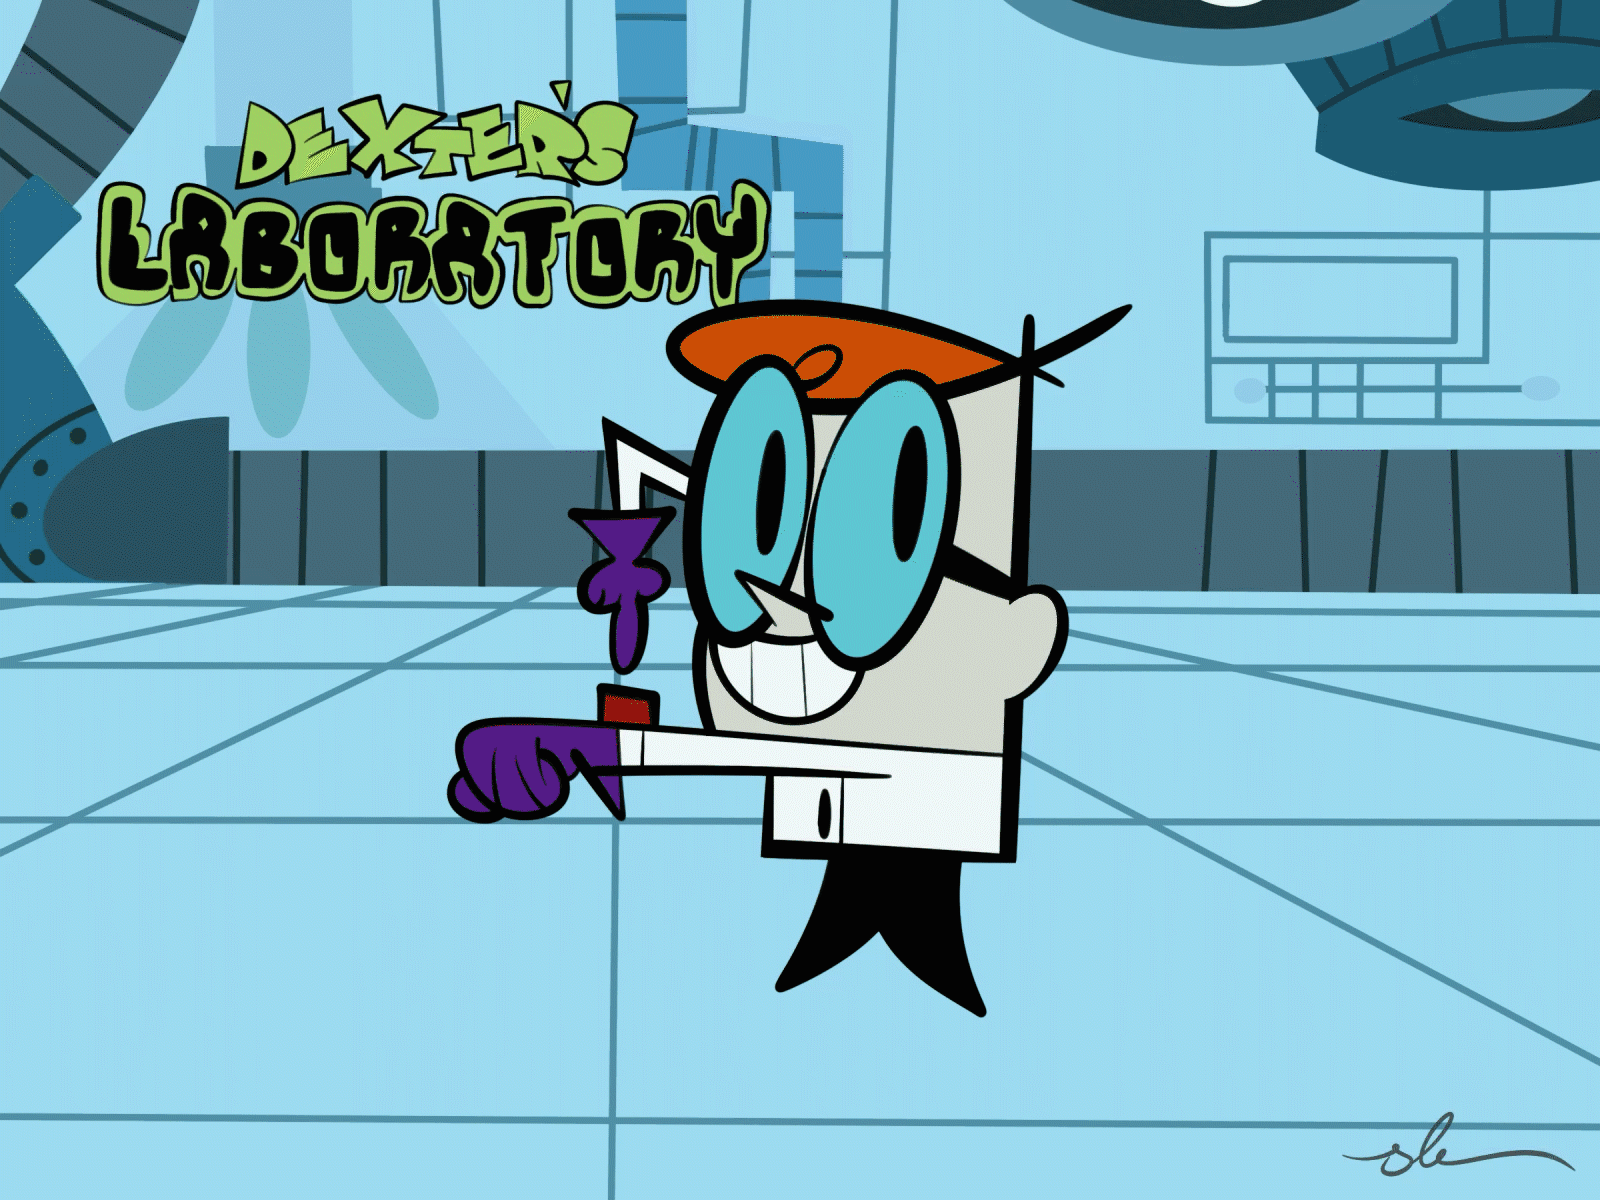 Dexter's Laboratory.
What does this button do?